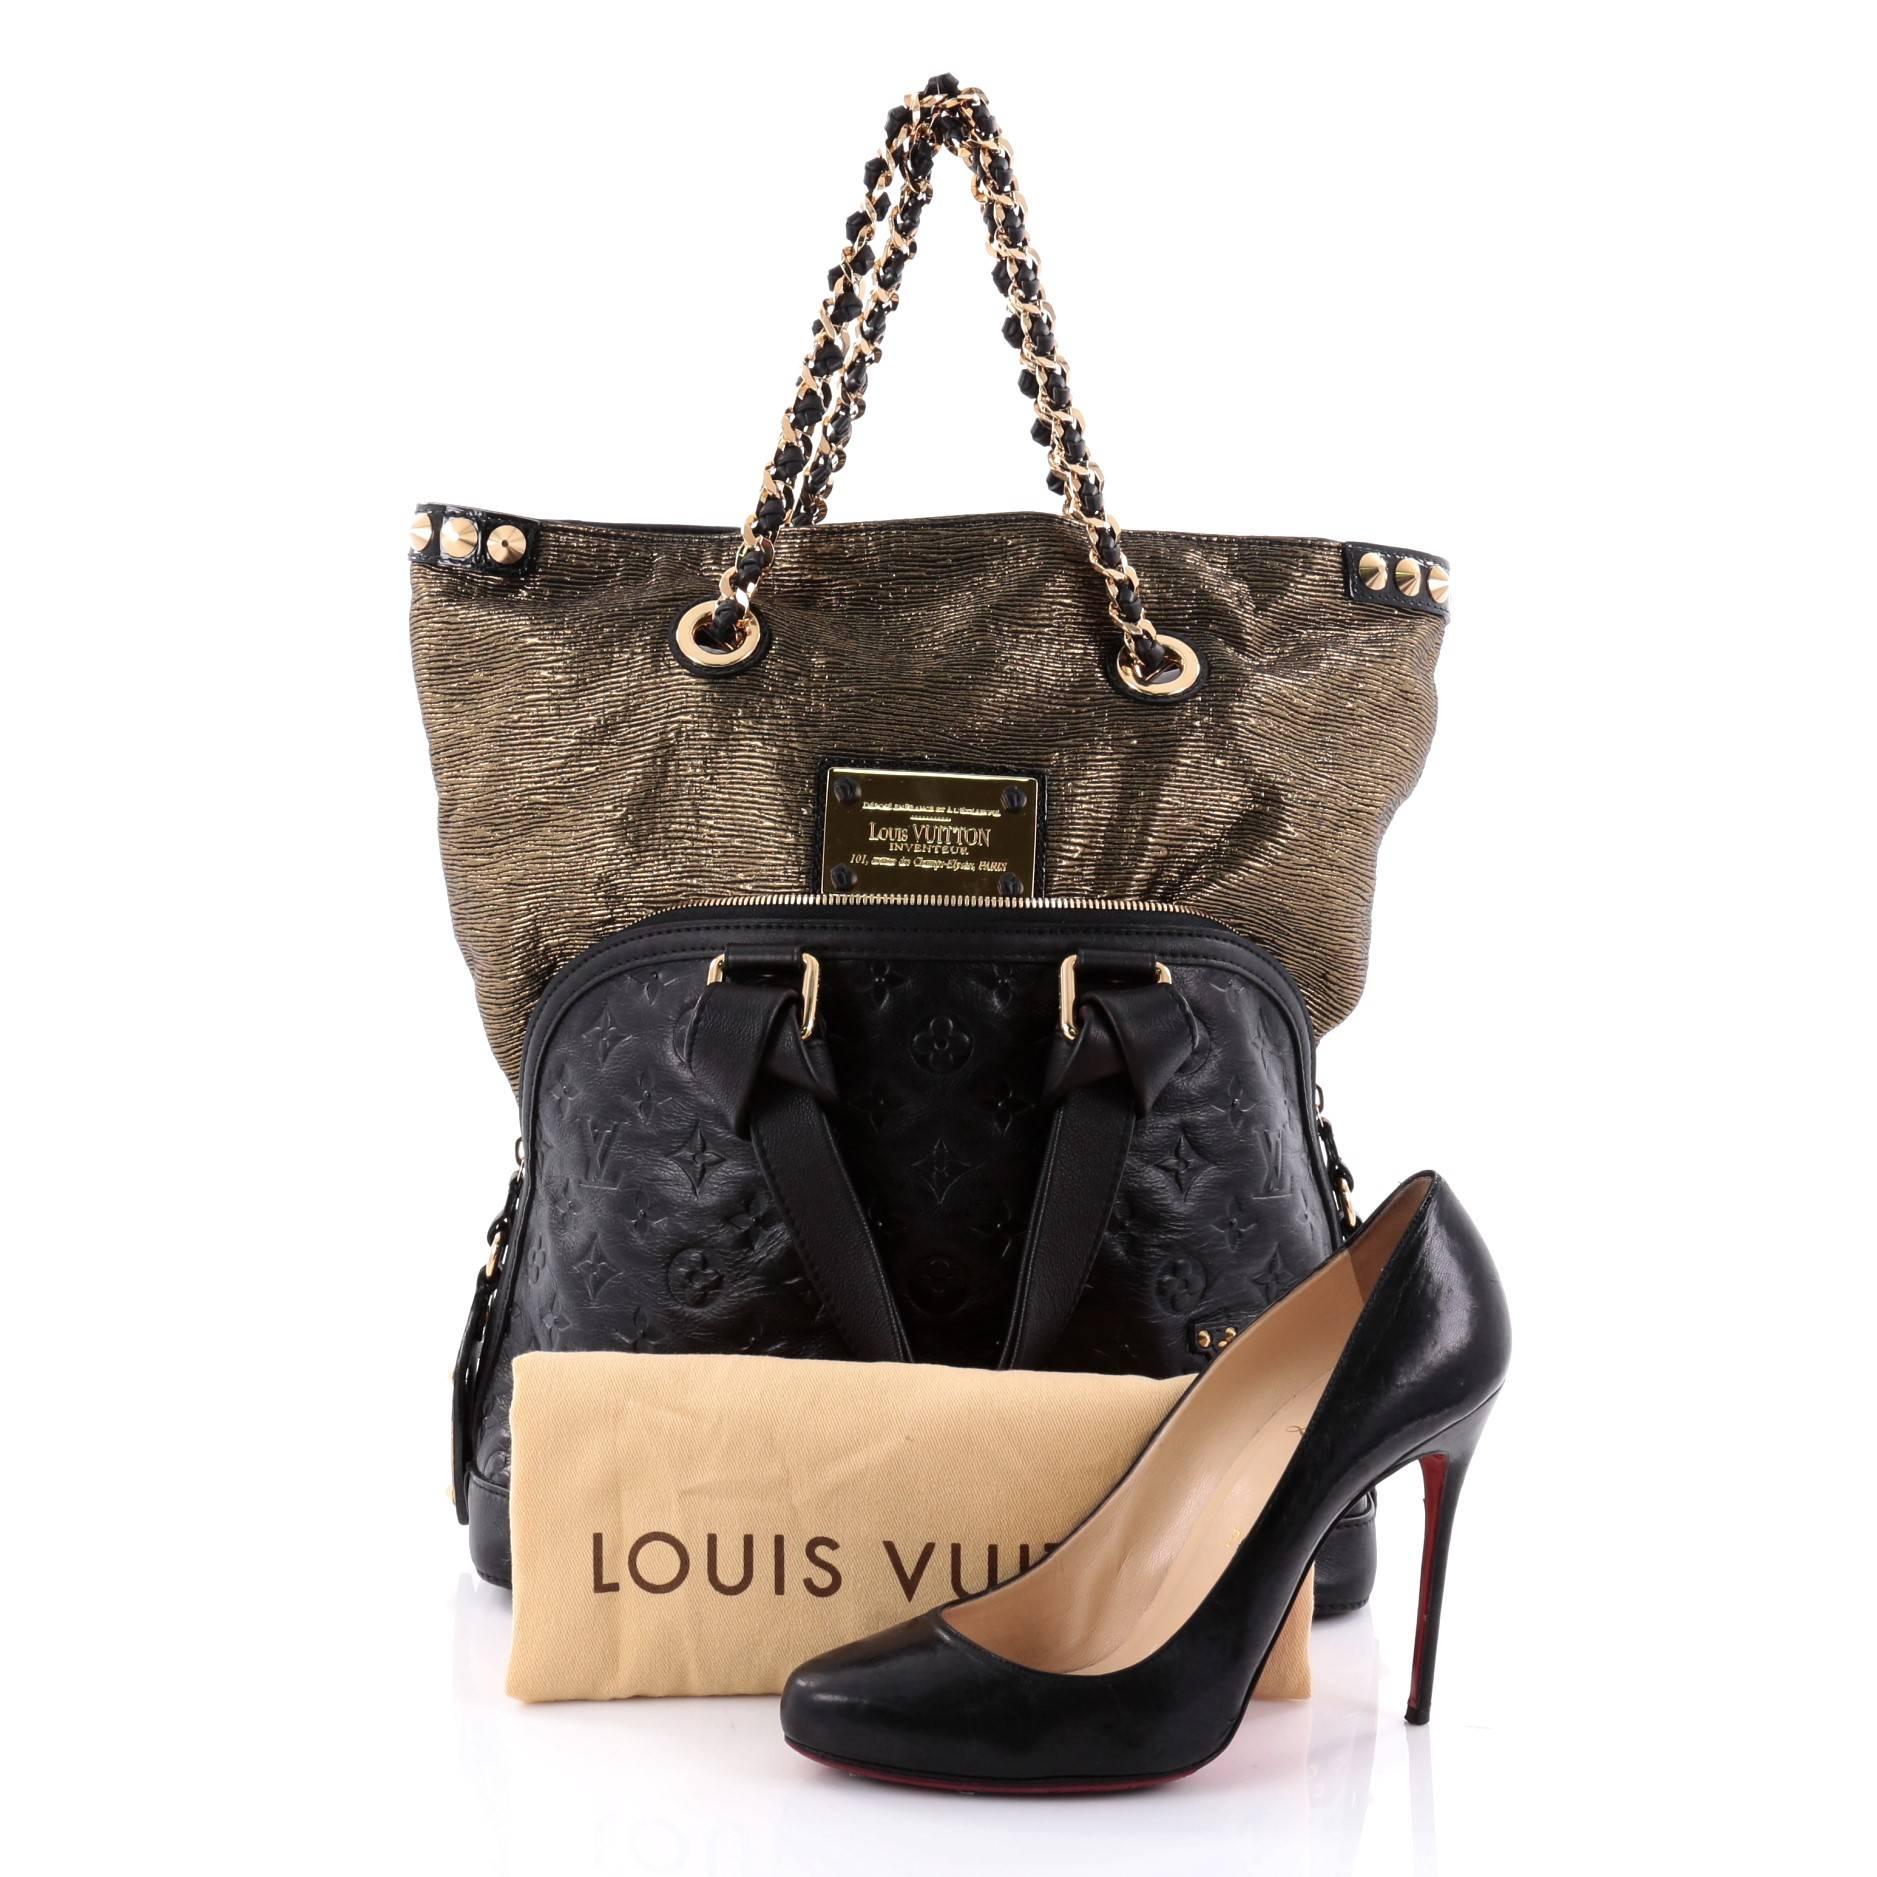 This authentic Louis Vuitton Double Jeu Neo Alma Handbag Limited Edition Monogram is a unique play on the iconic Alma. The name Double Jeu roughly translates to "double play", which refers to the bag-in-bag nature of this limited edition